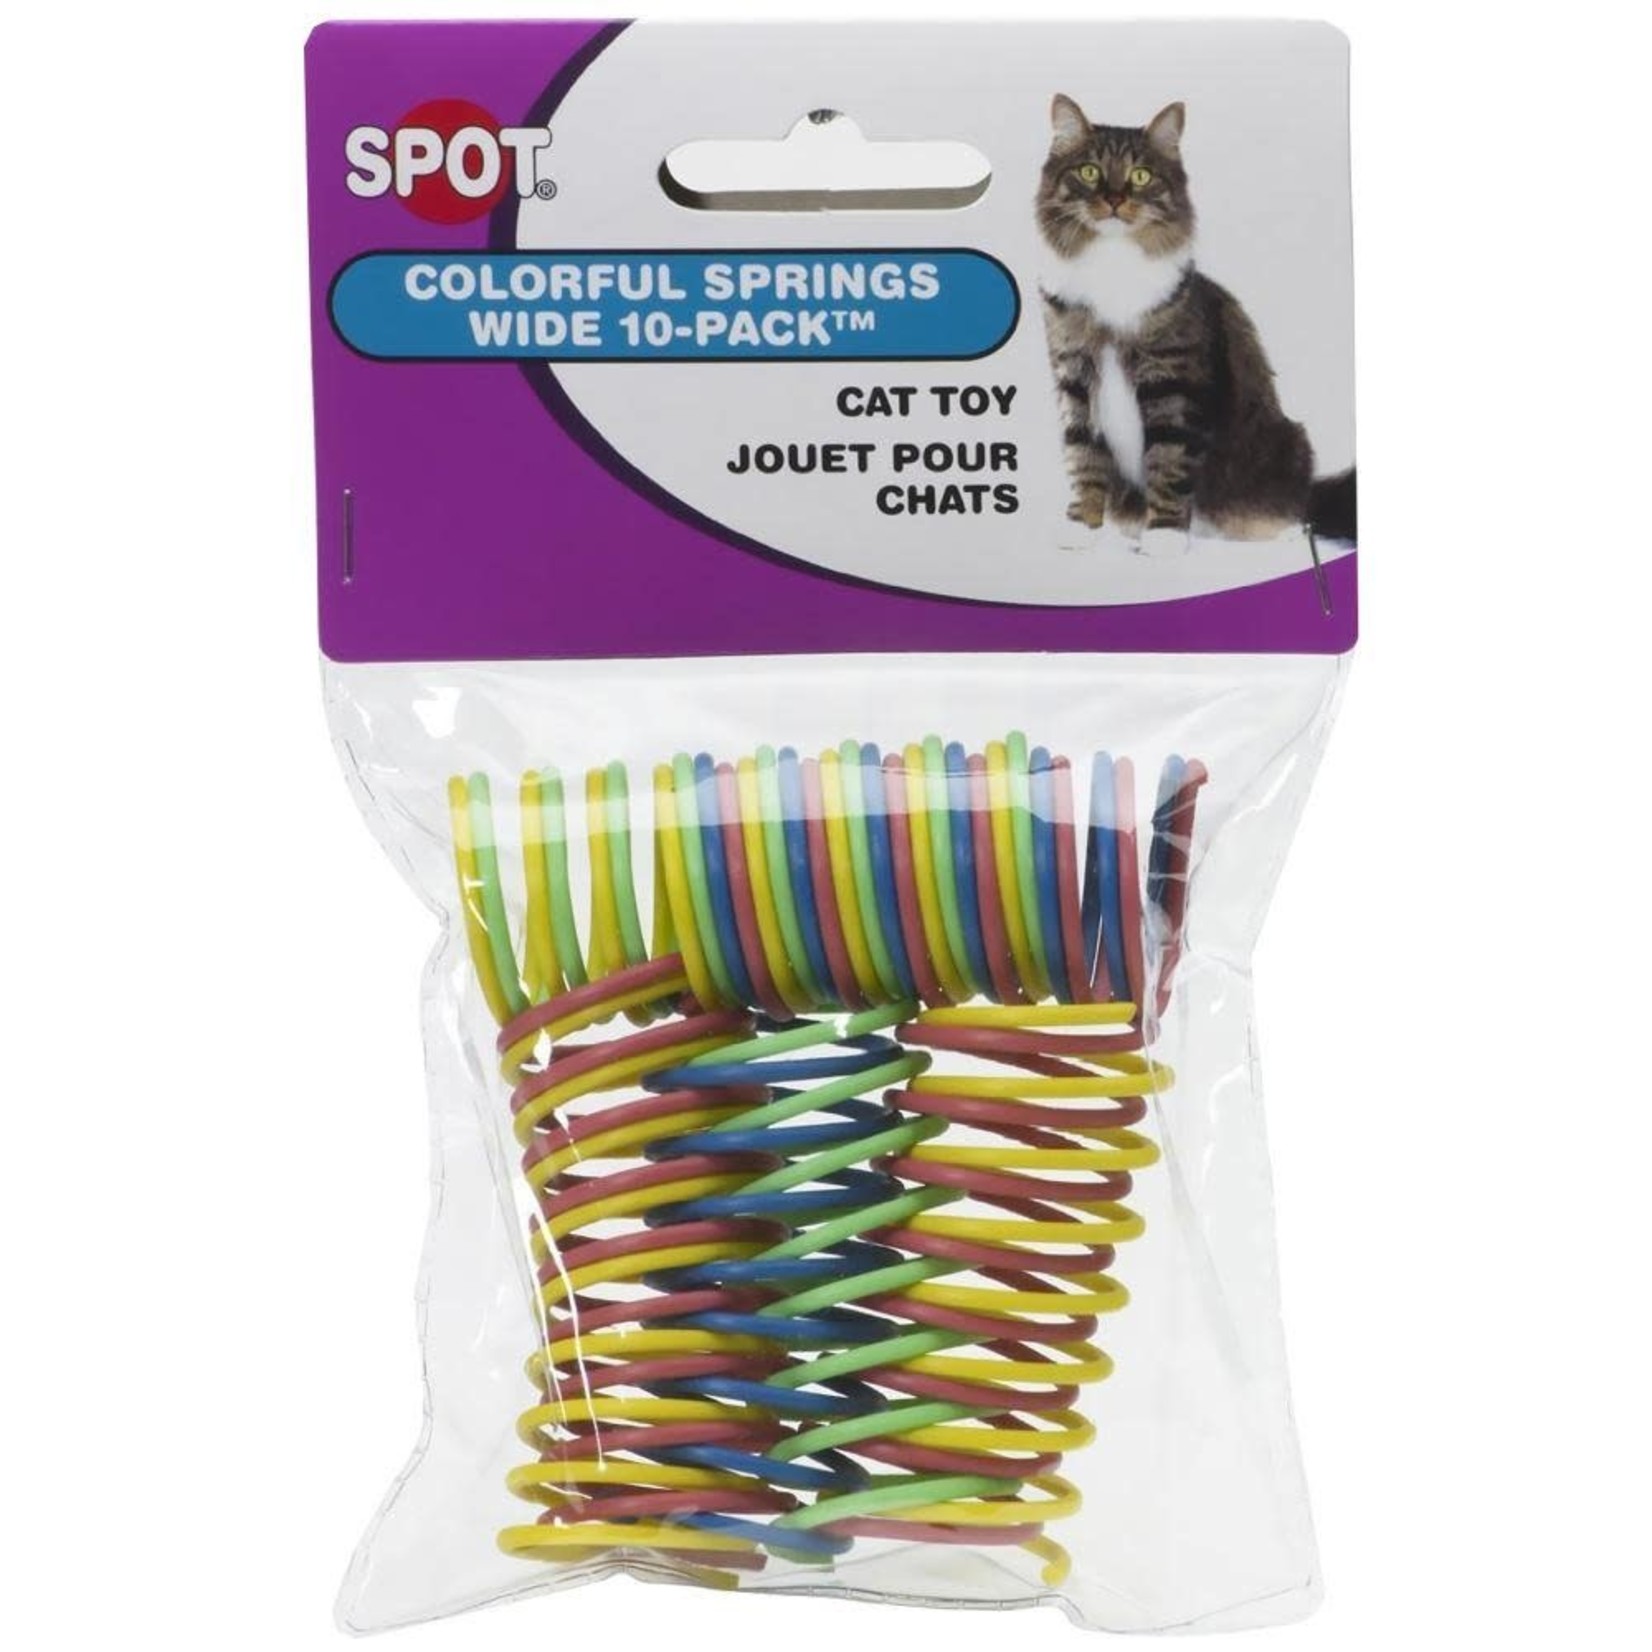 SPOT Colorful Springs Wide 10 pk